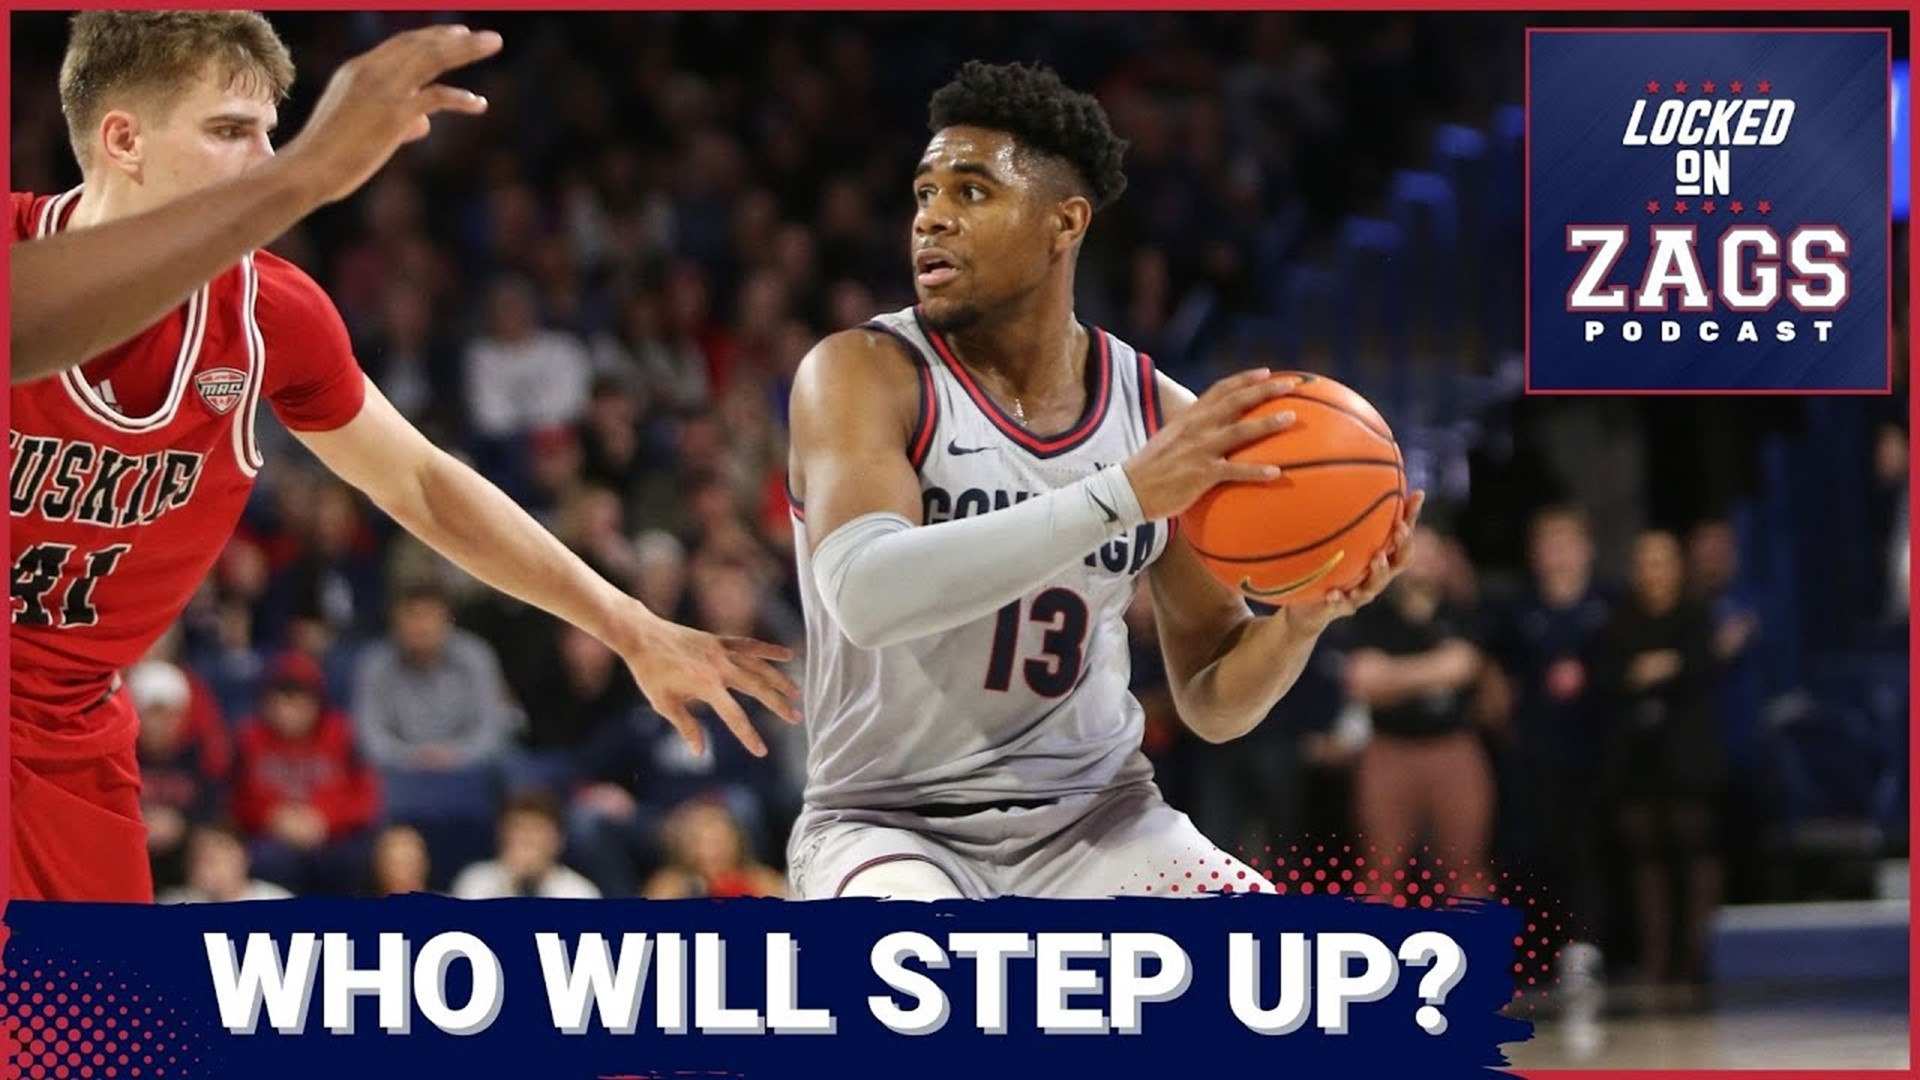 The Gonzaga Bulldogs and Alabama Crimson Tide have a huge matchup slated for Saturday and Julian Strawther and Malachi Smith are extremely key for the Zags to win.